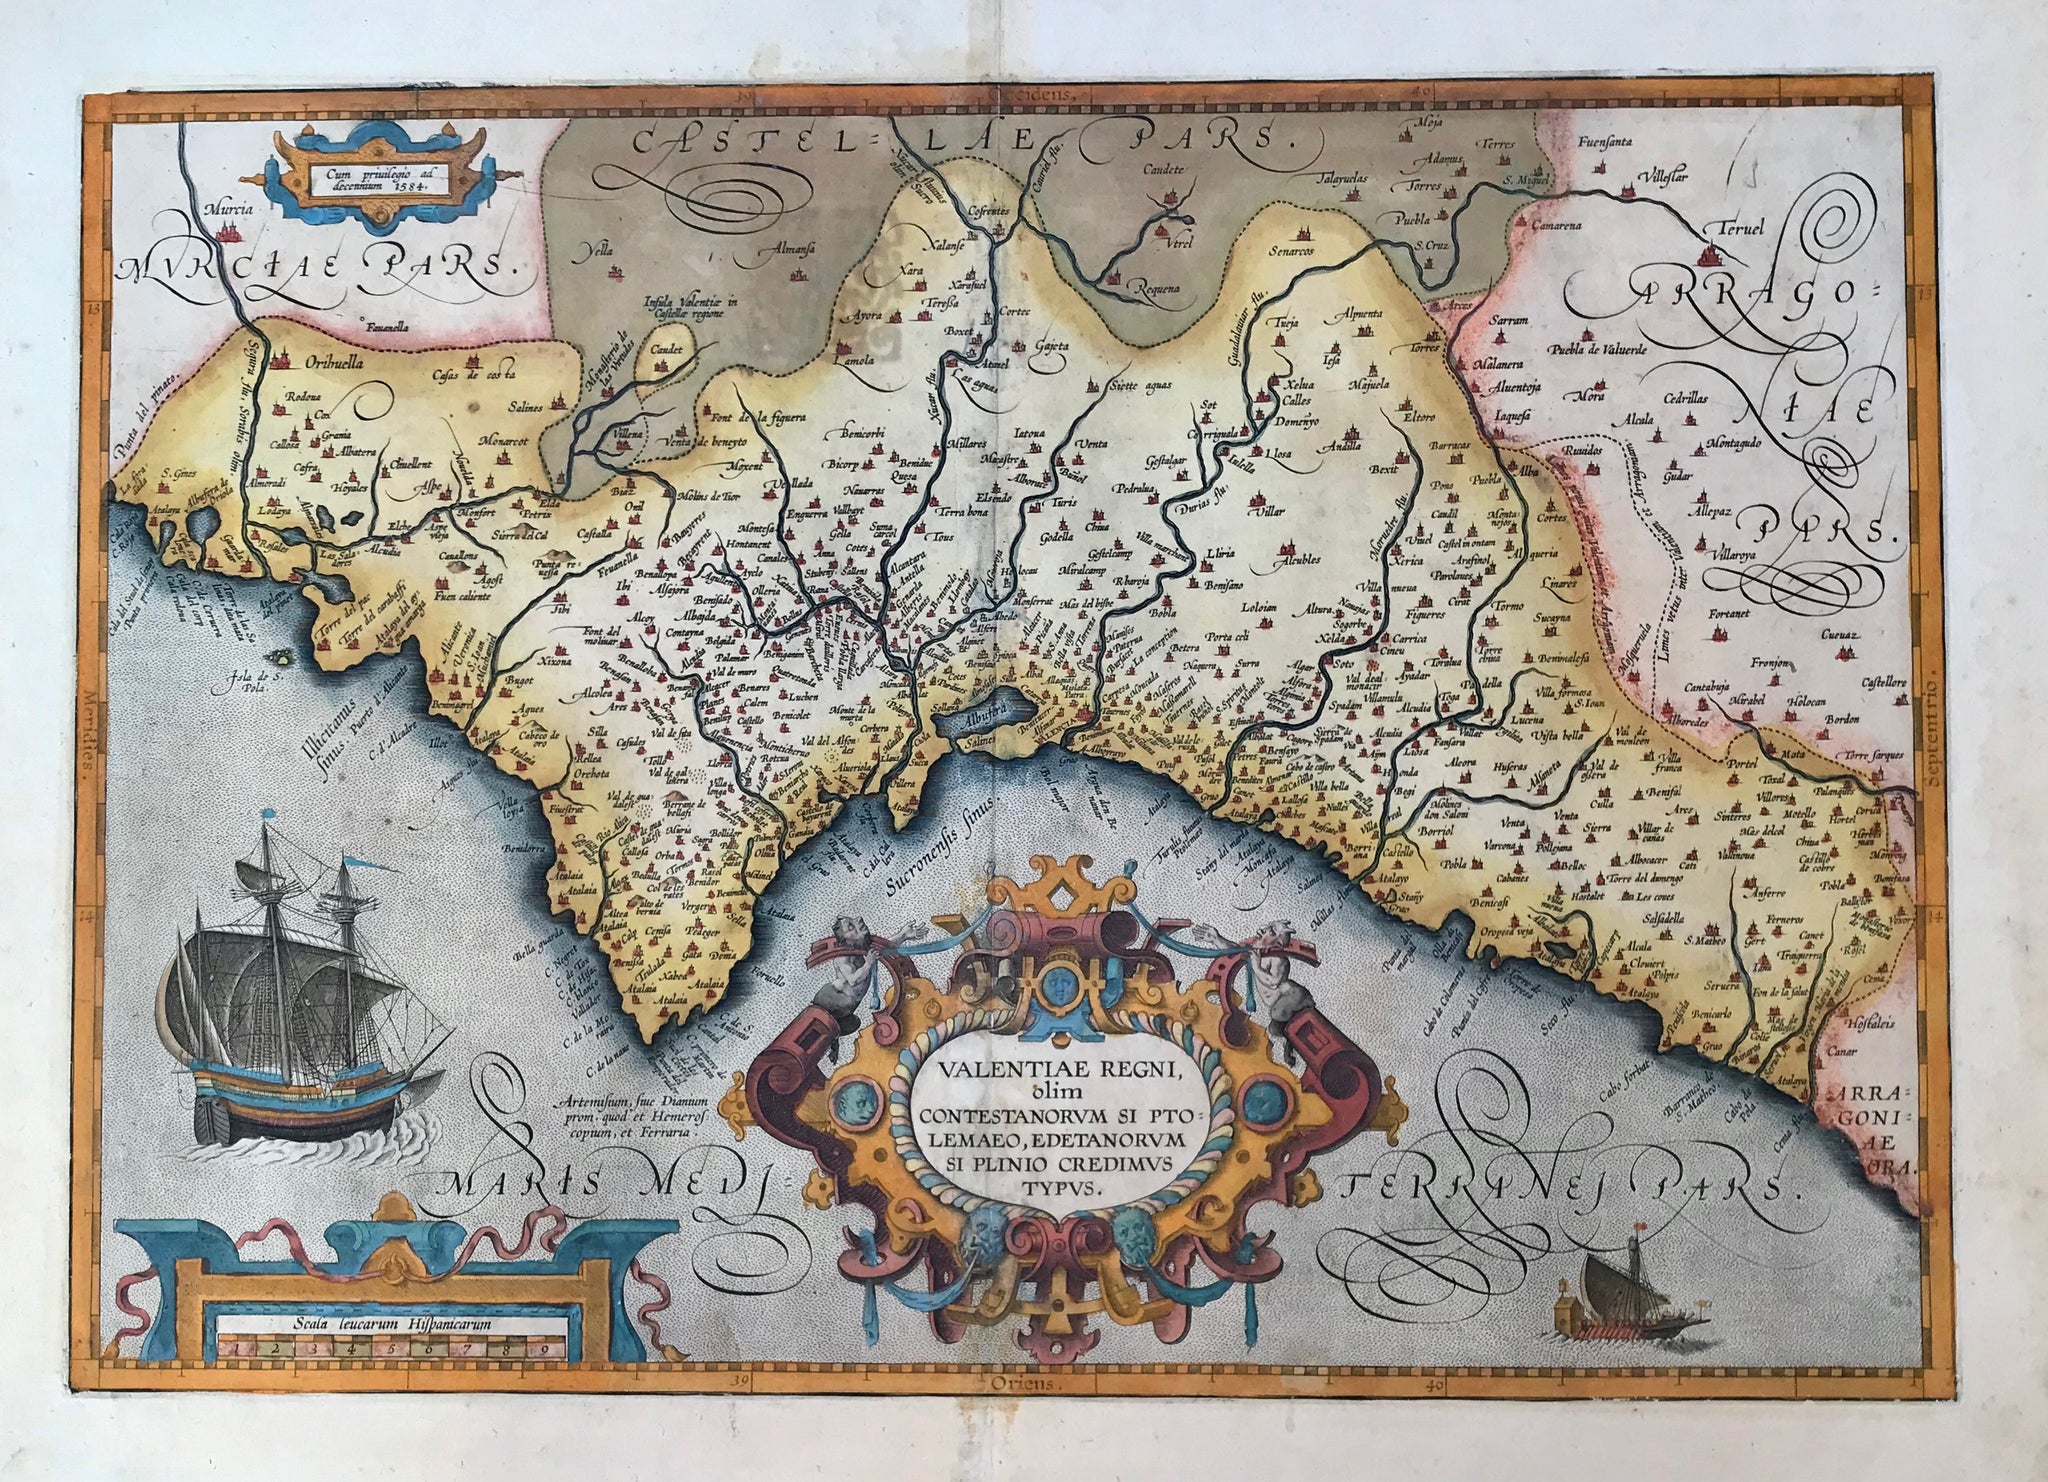 Spain, Espagña, "Regni Valentiae Typus". Province of Valencia, Spain. Copper etching from the atlas by J. Janssonius. Original hand coloring. Amsterdam, ca. 1650.  Map shows coastline of the province of Valencia and the hinterland. Two decorative cartouches, ship and sea monster. Riverse side text in German.